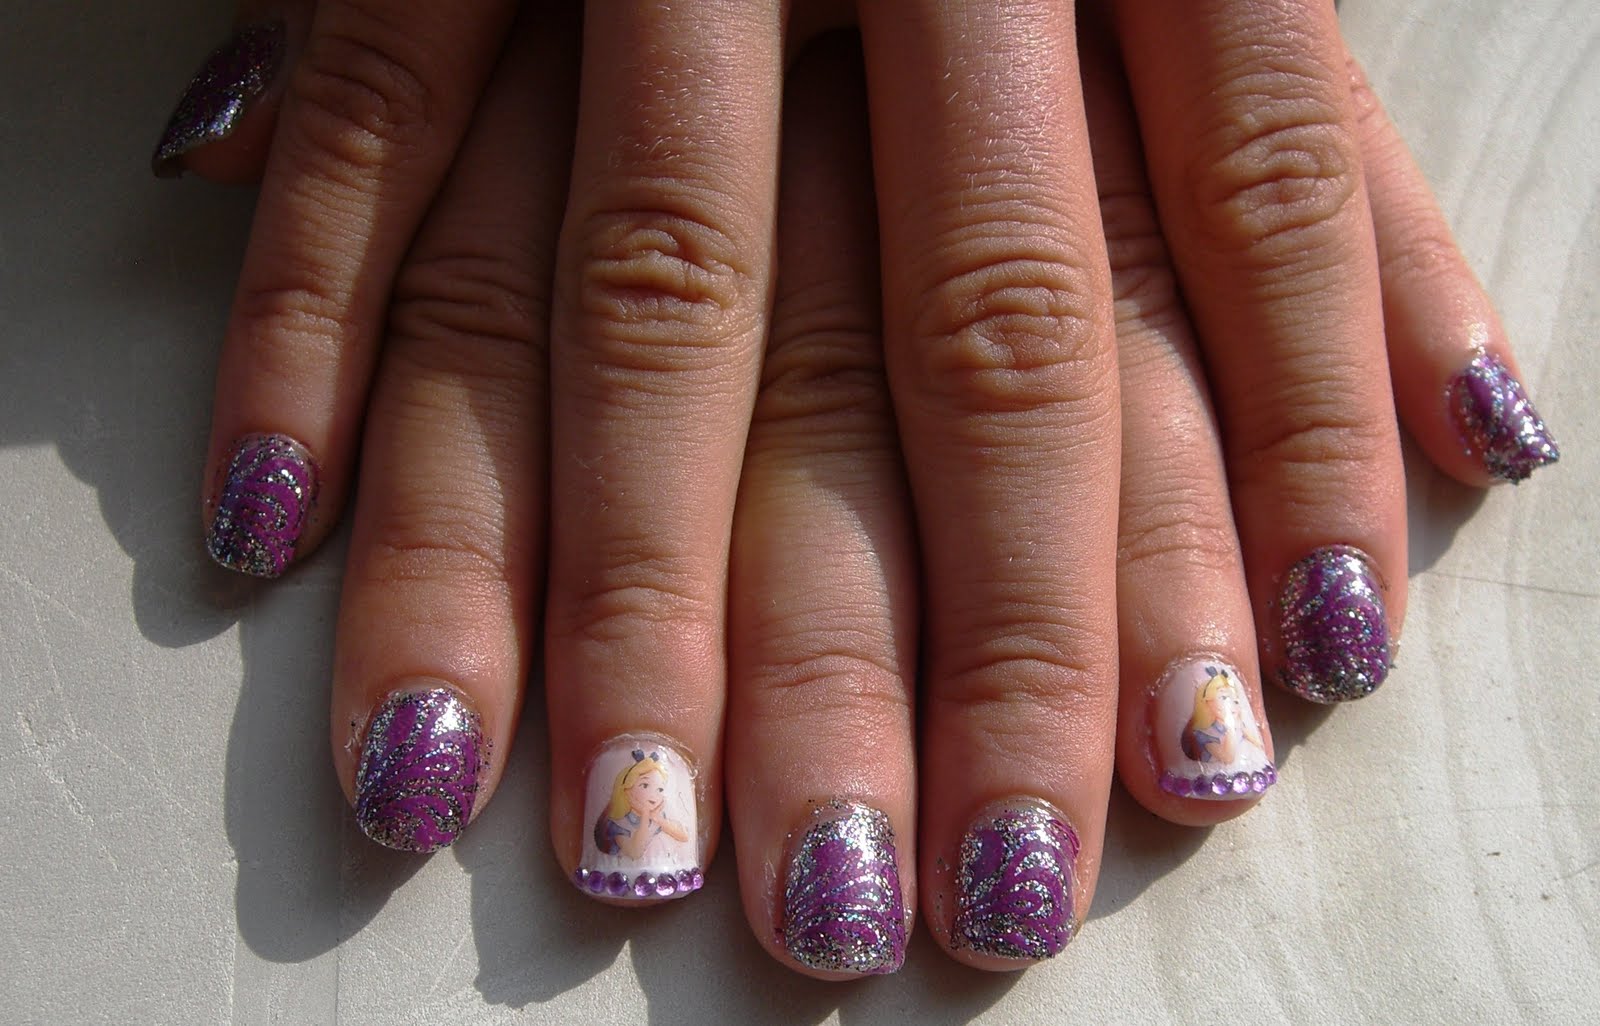 4. Mad Hatter Nail Design - wide 2